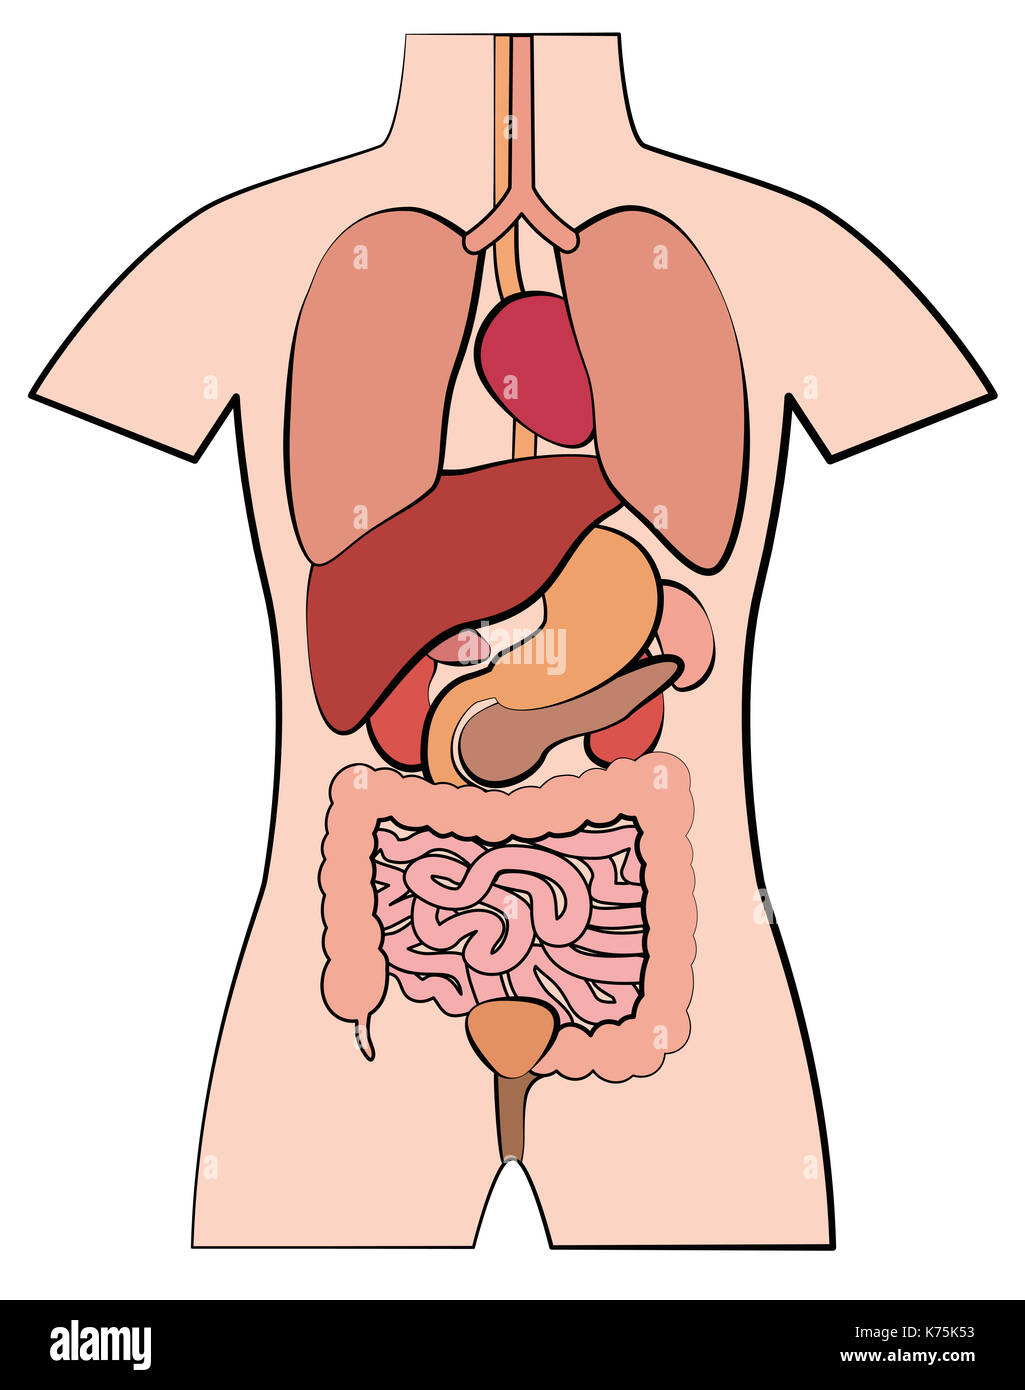 Human anatomy, internal organs - schematic outline comic style illustration on white background. Stock Photo